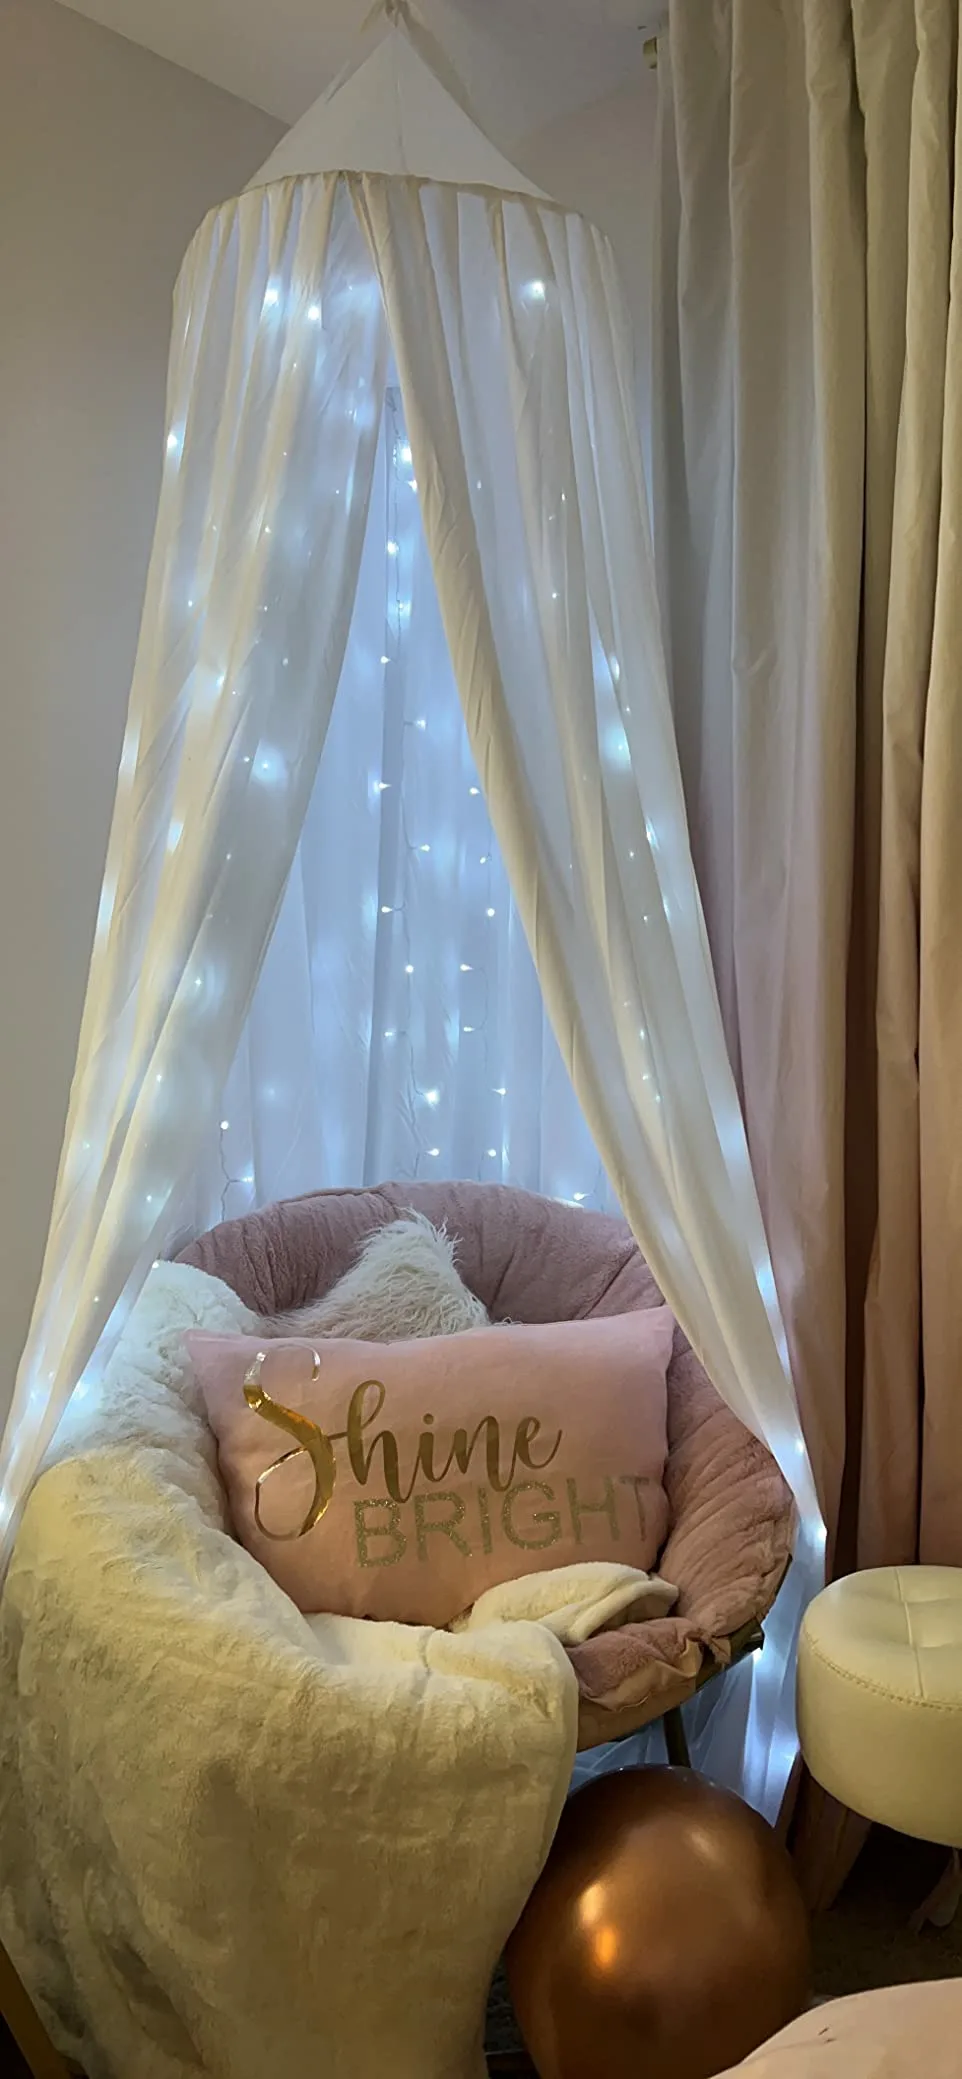 Blue Hanging Shine Bright Pillow Angle View Fairy Lights